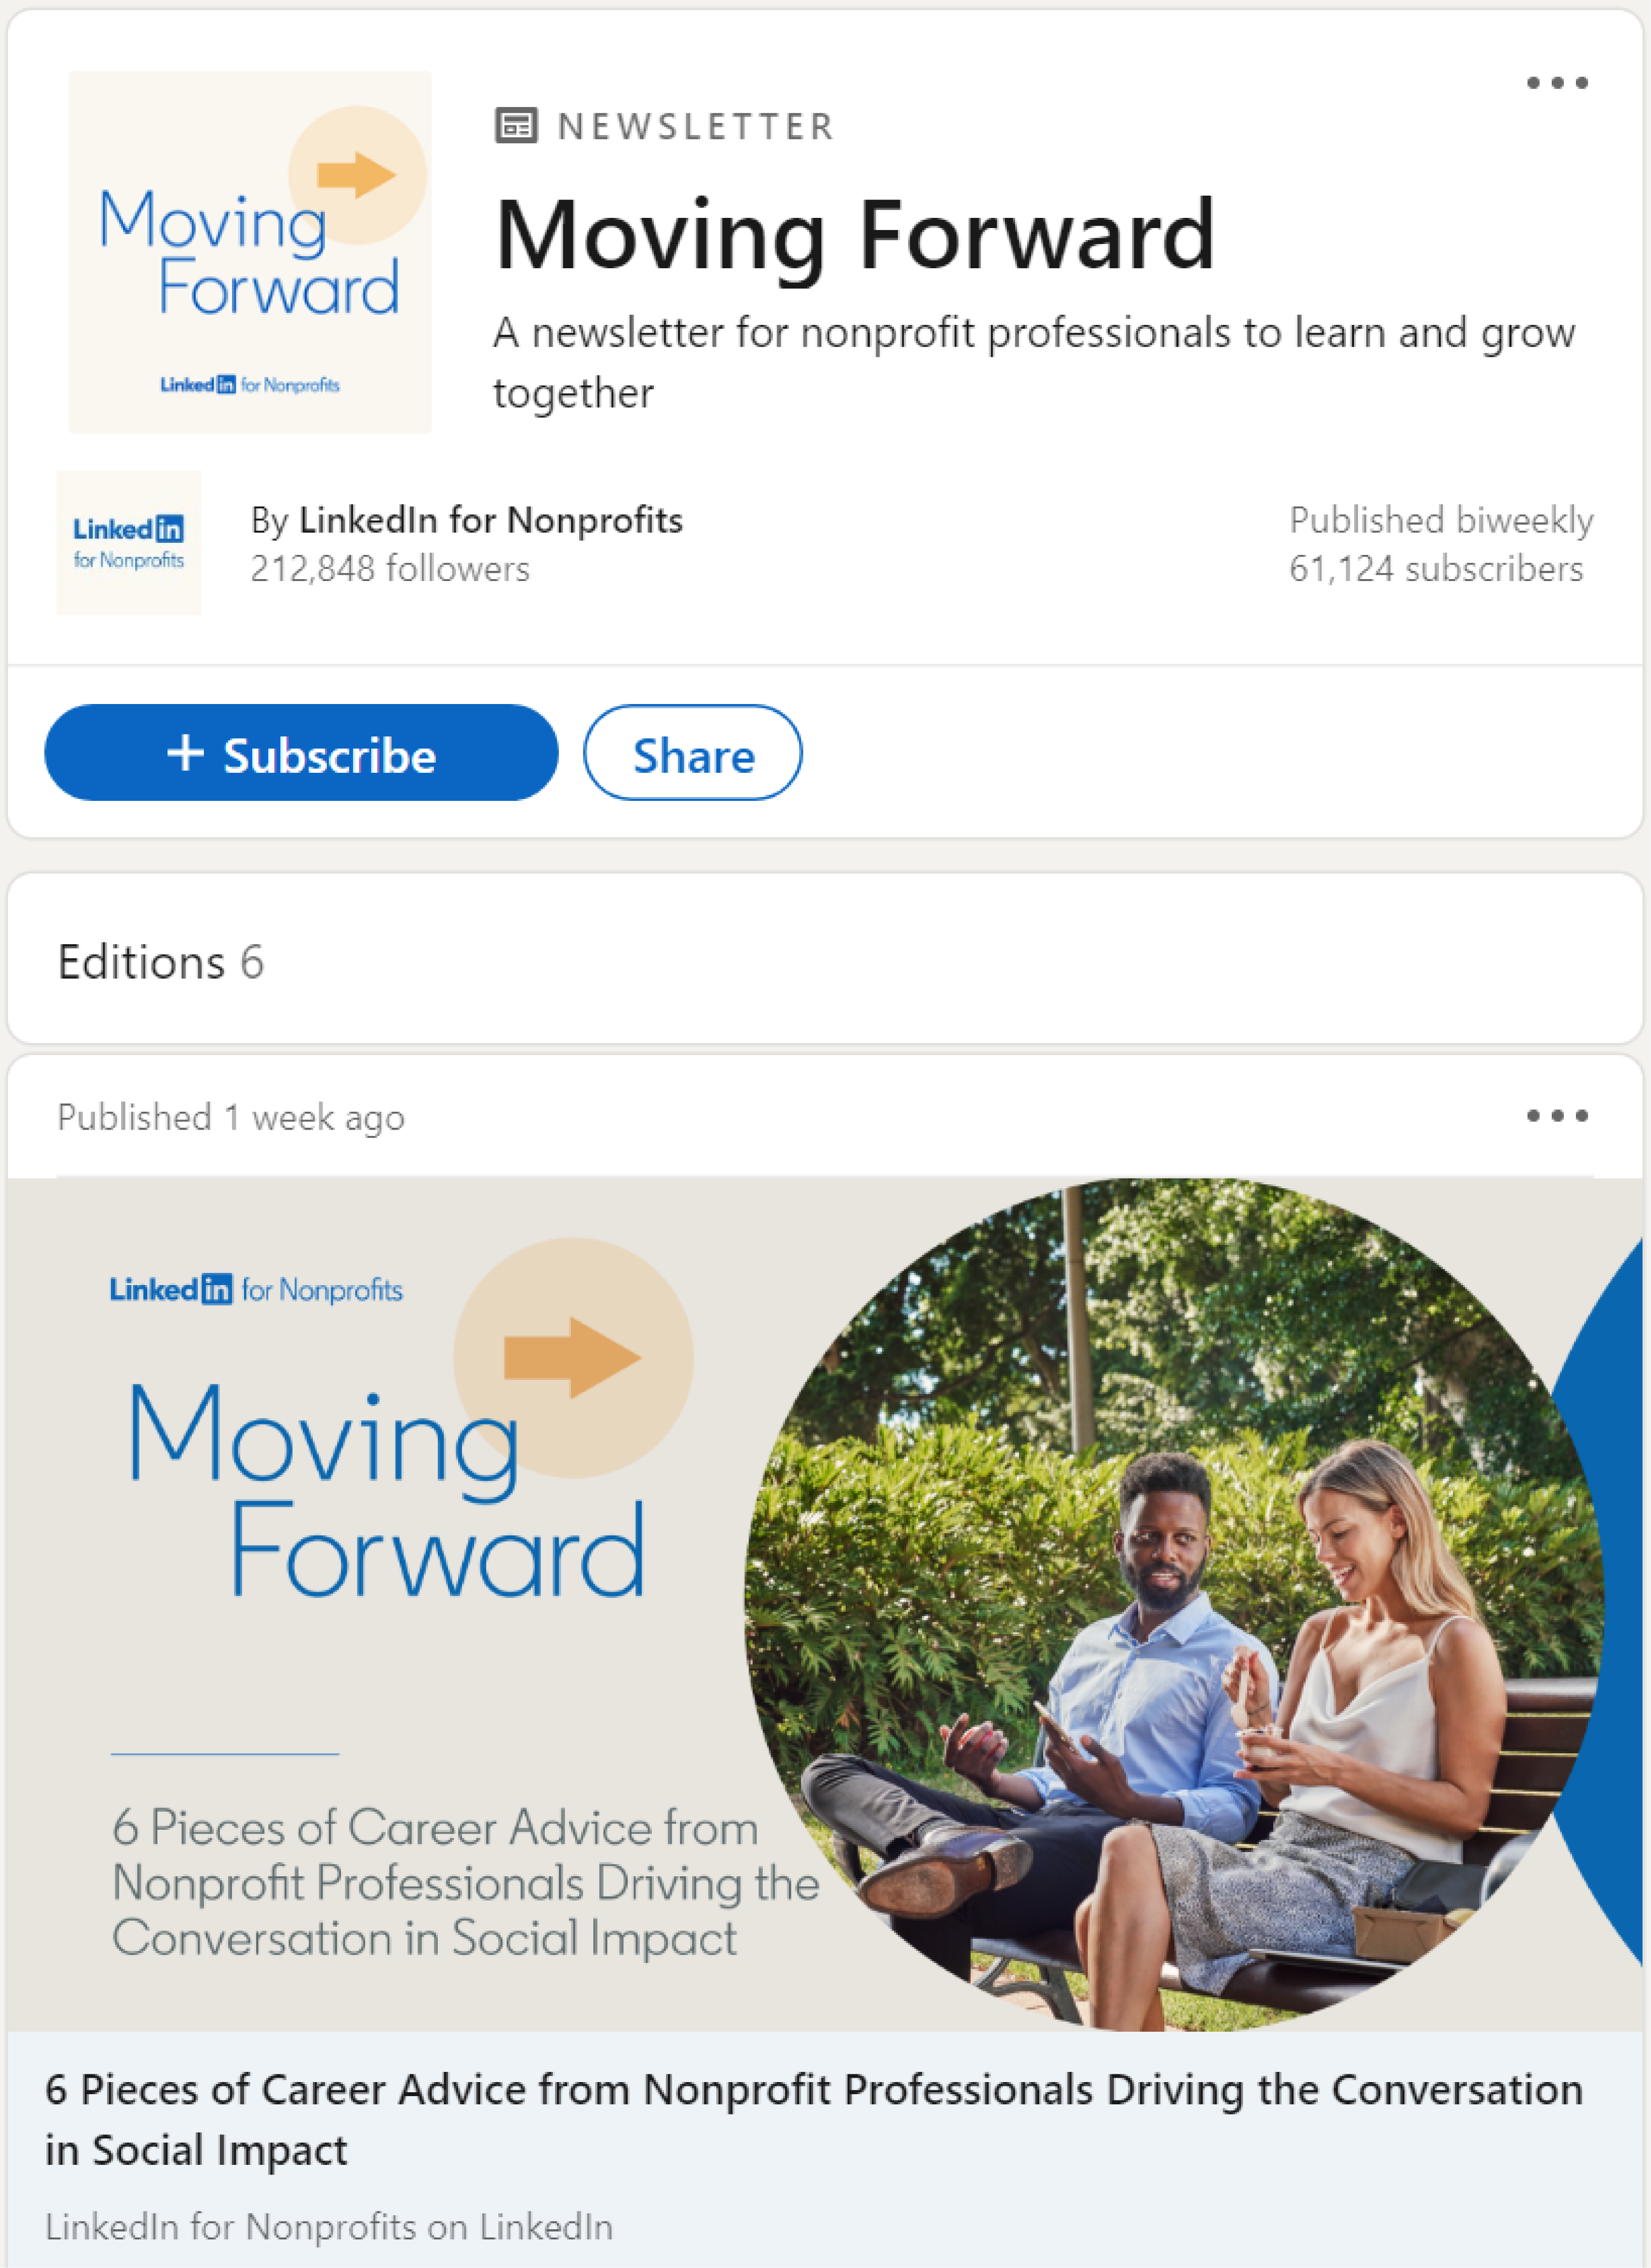 The LinkedIn for Nonprofits newsletter, Moving Forward, on LinkedIn. The newsletter page includes a logo and tagline, subscribe button, subscriber count, and recent editions.